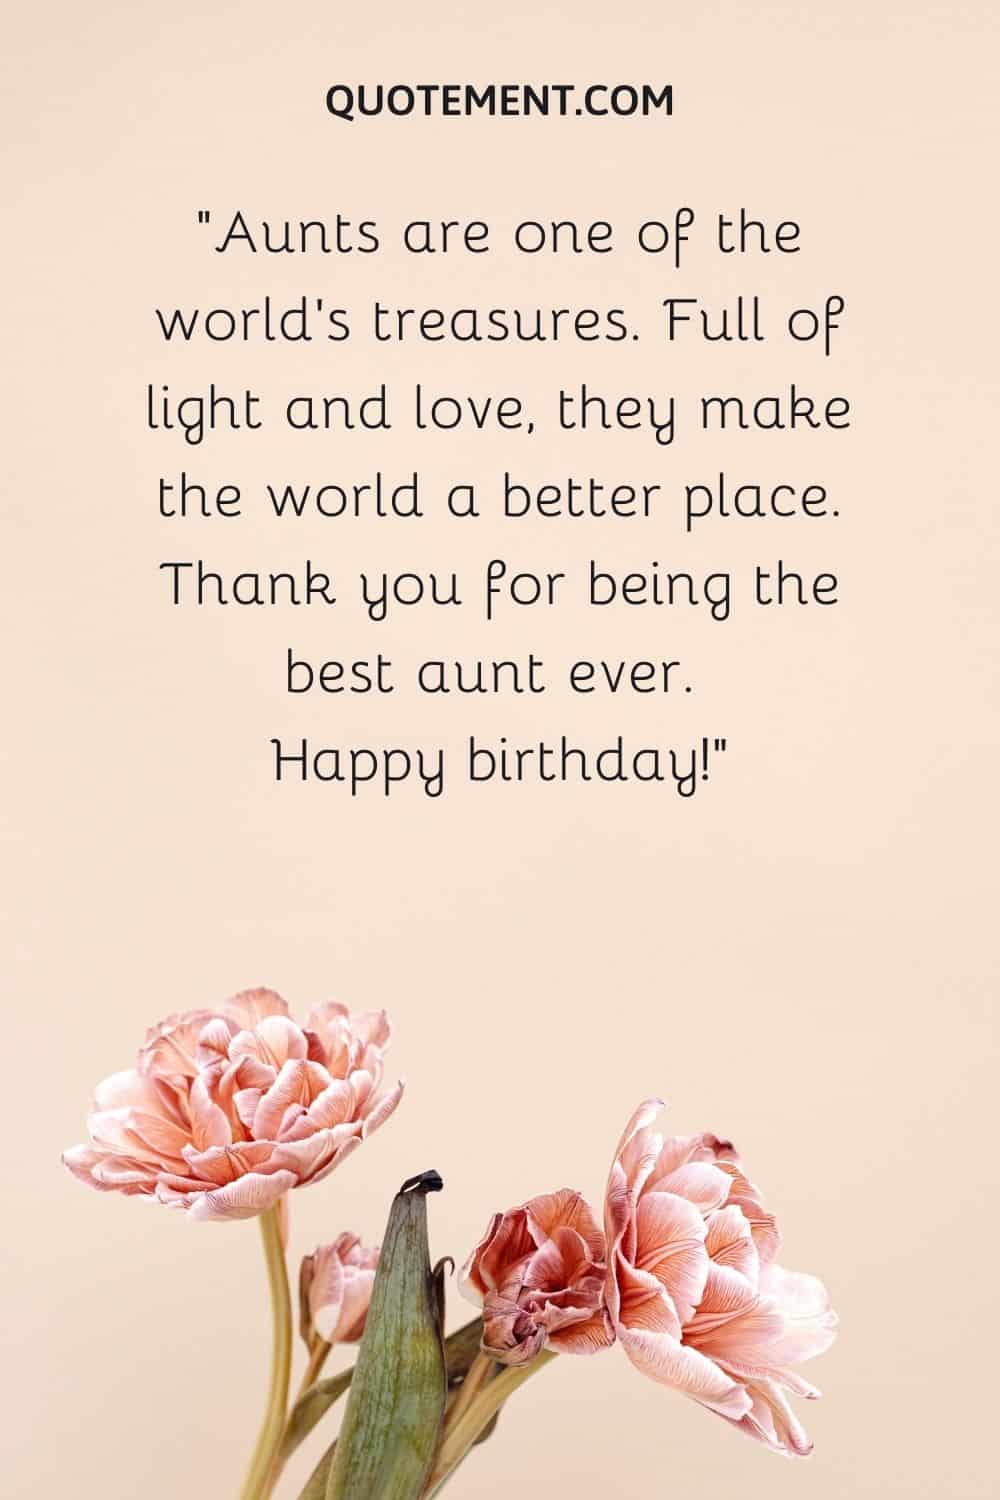 Happy birthday quotes for an aunt